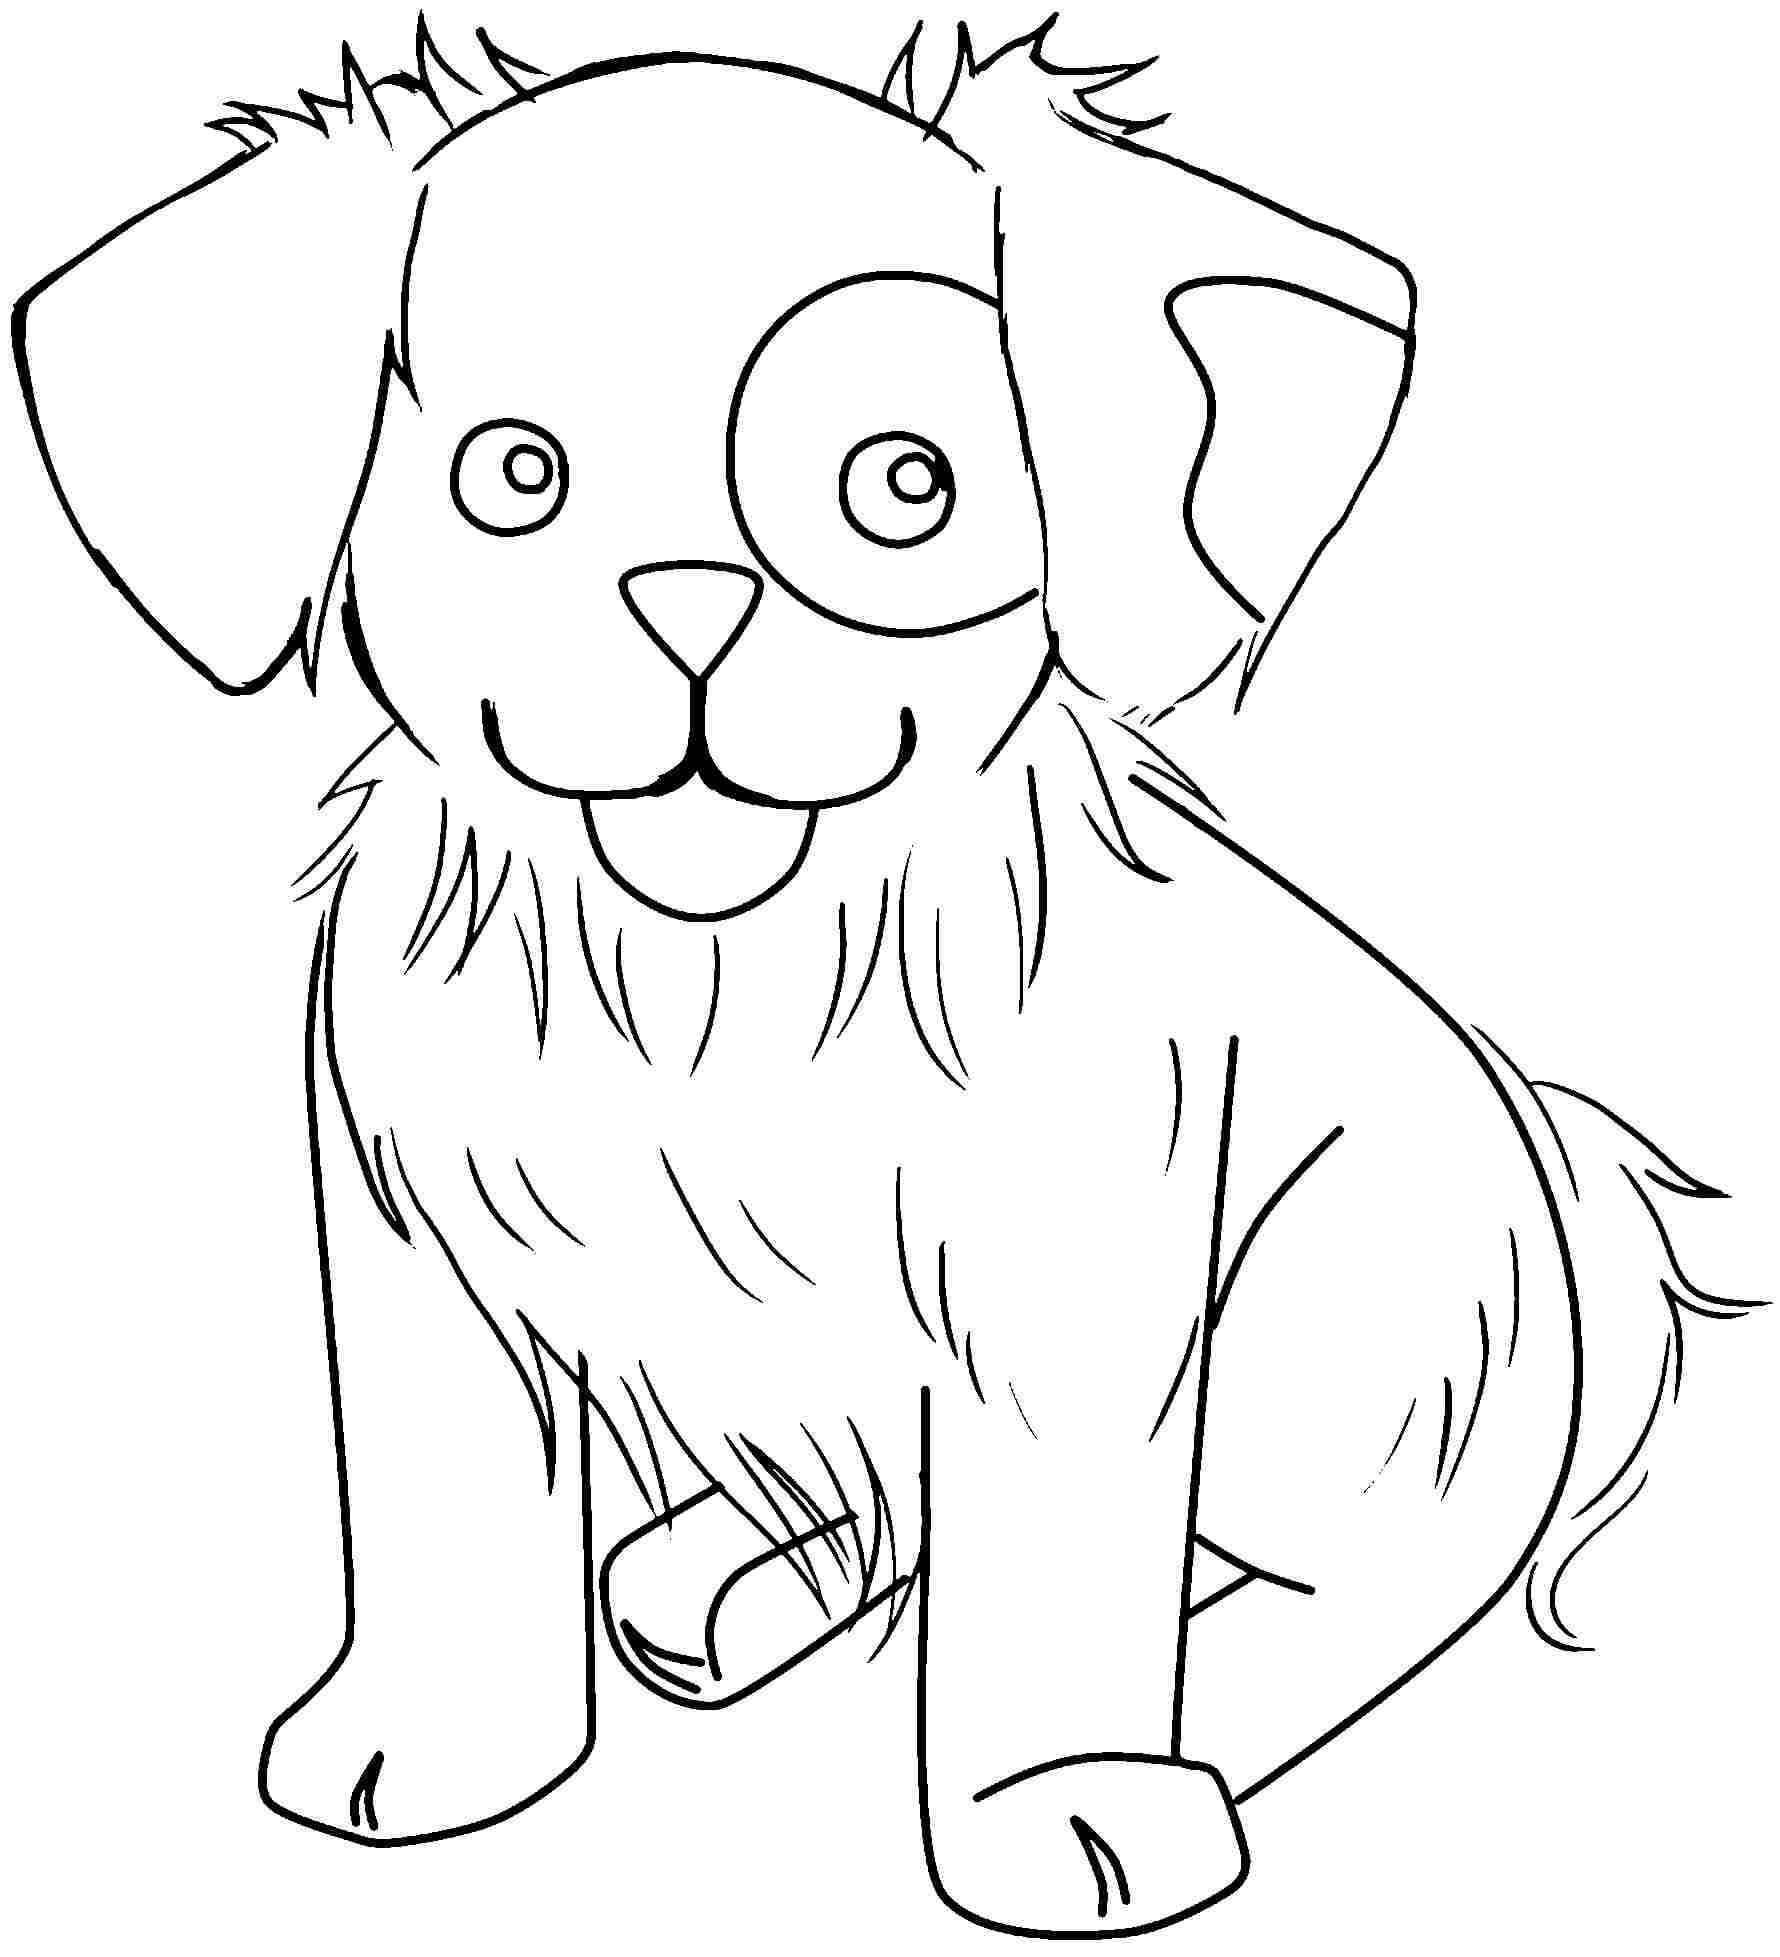 Cute Dog Animal - Animal Coloring Pages You Can Print Instantly